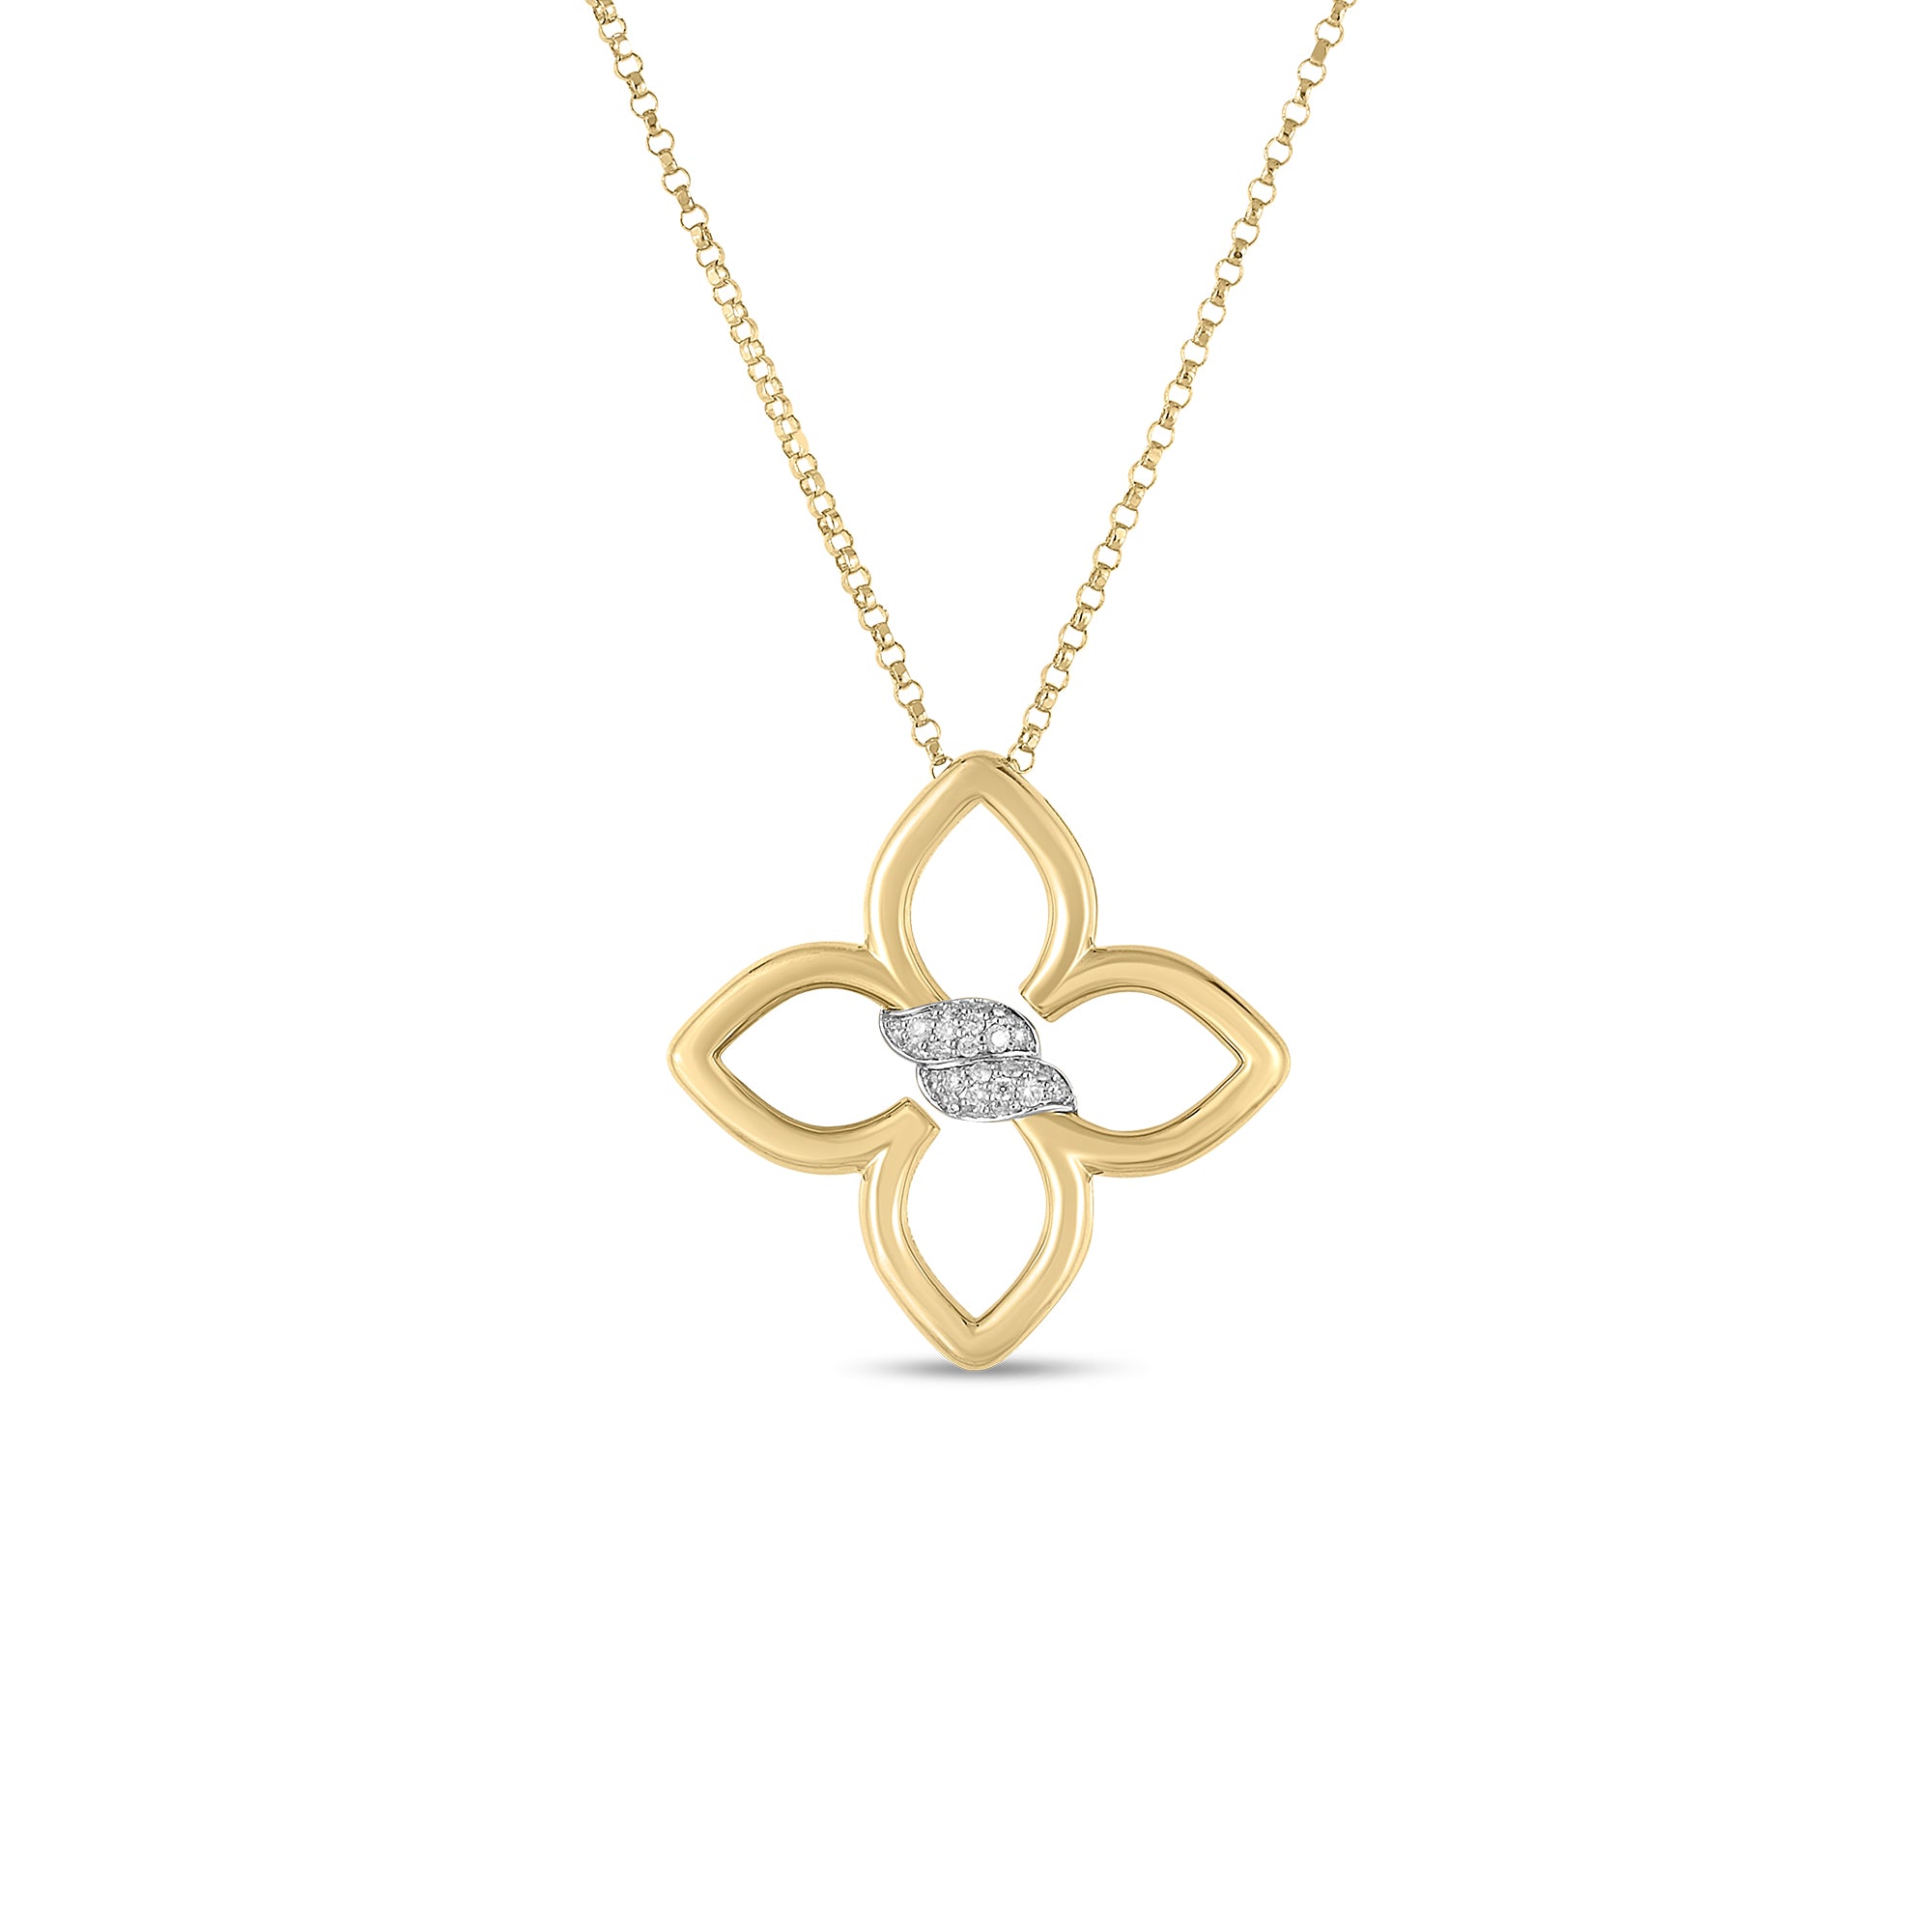 18K YELLOW GOLD AND DIAMOND CIALOMA NECKLACE